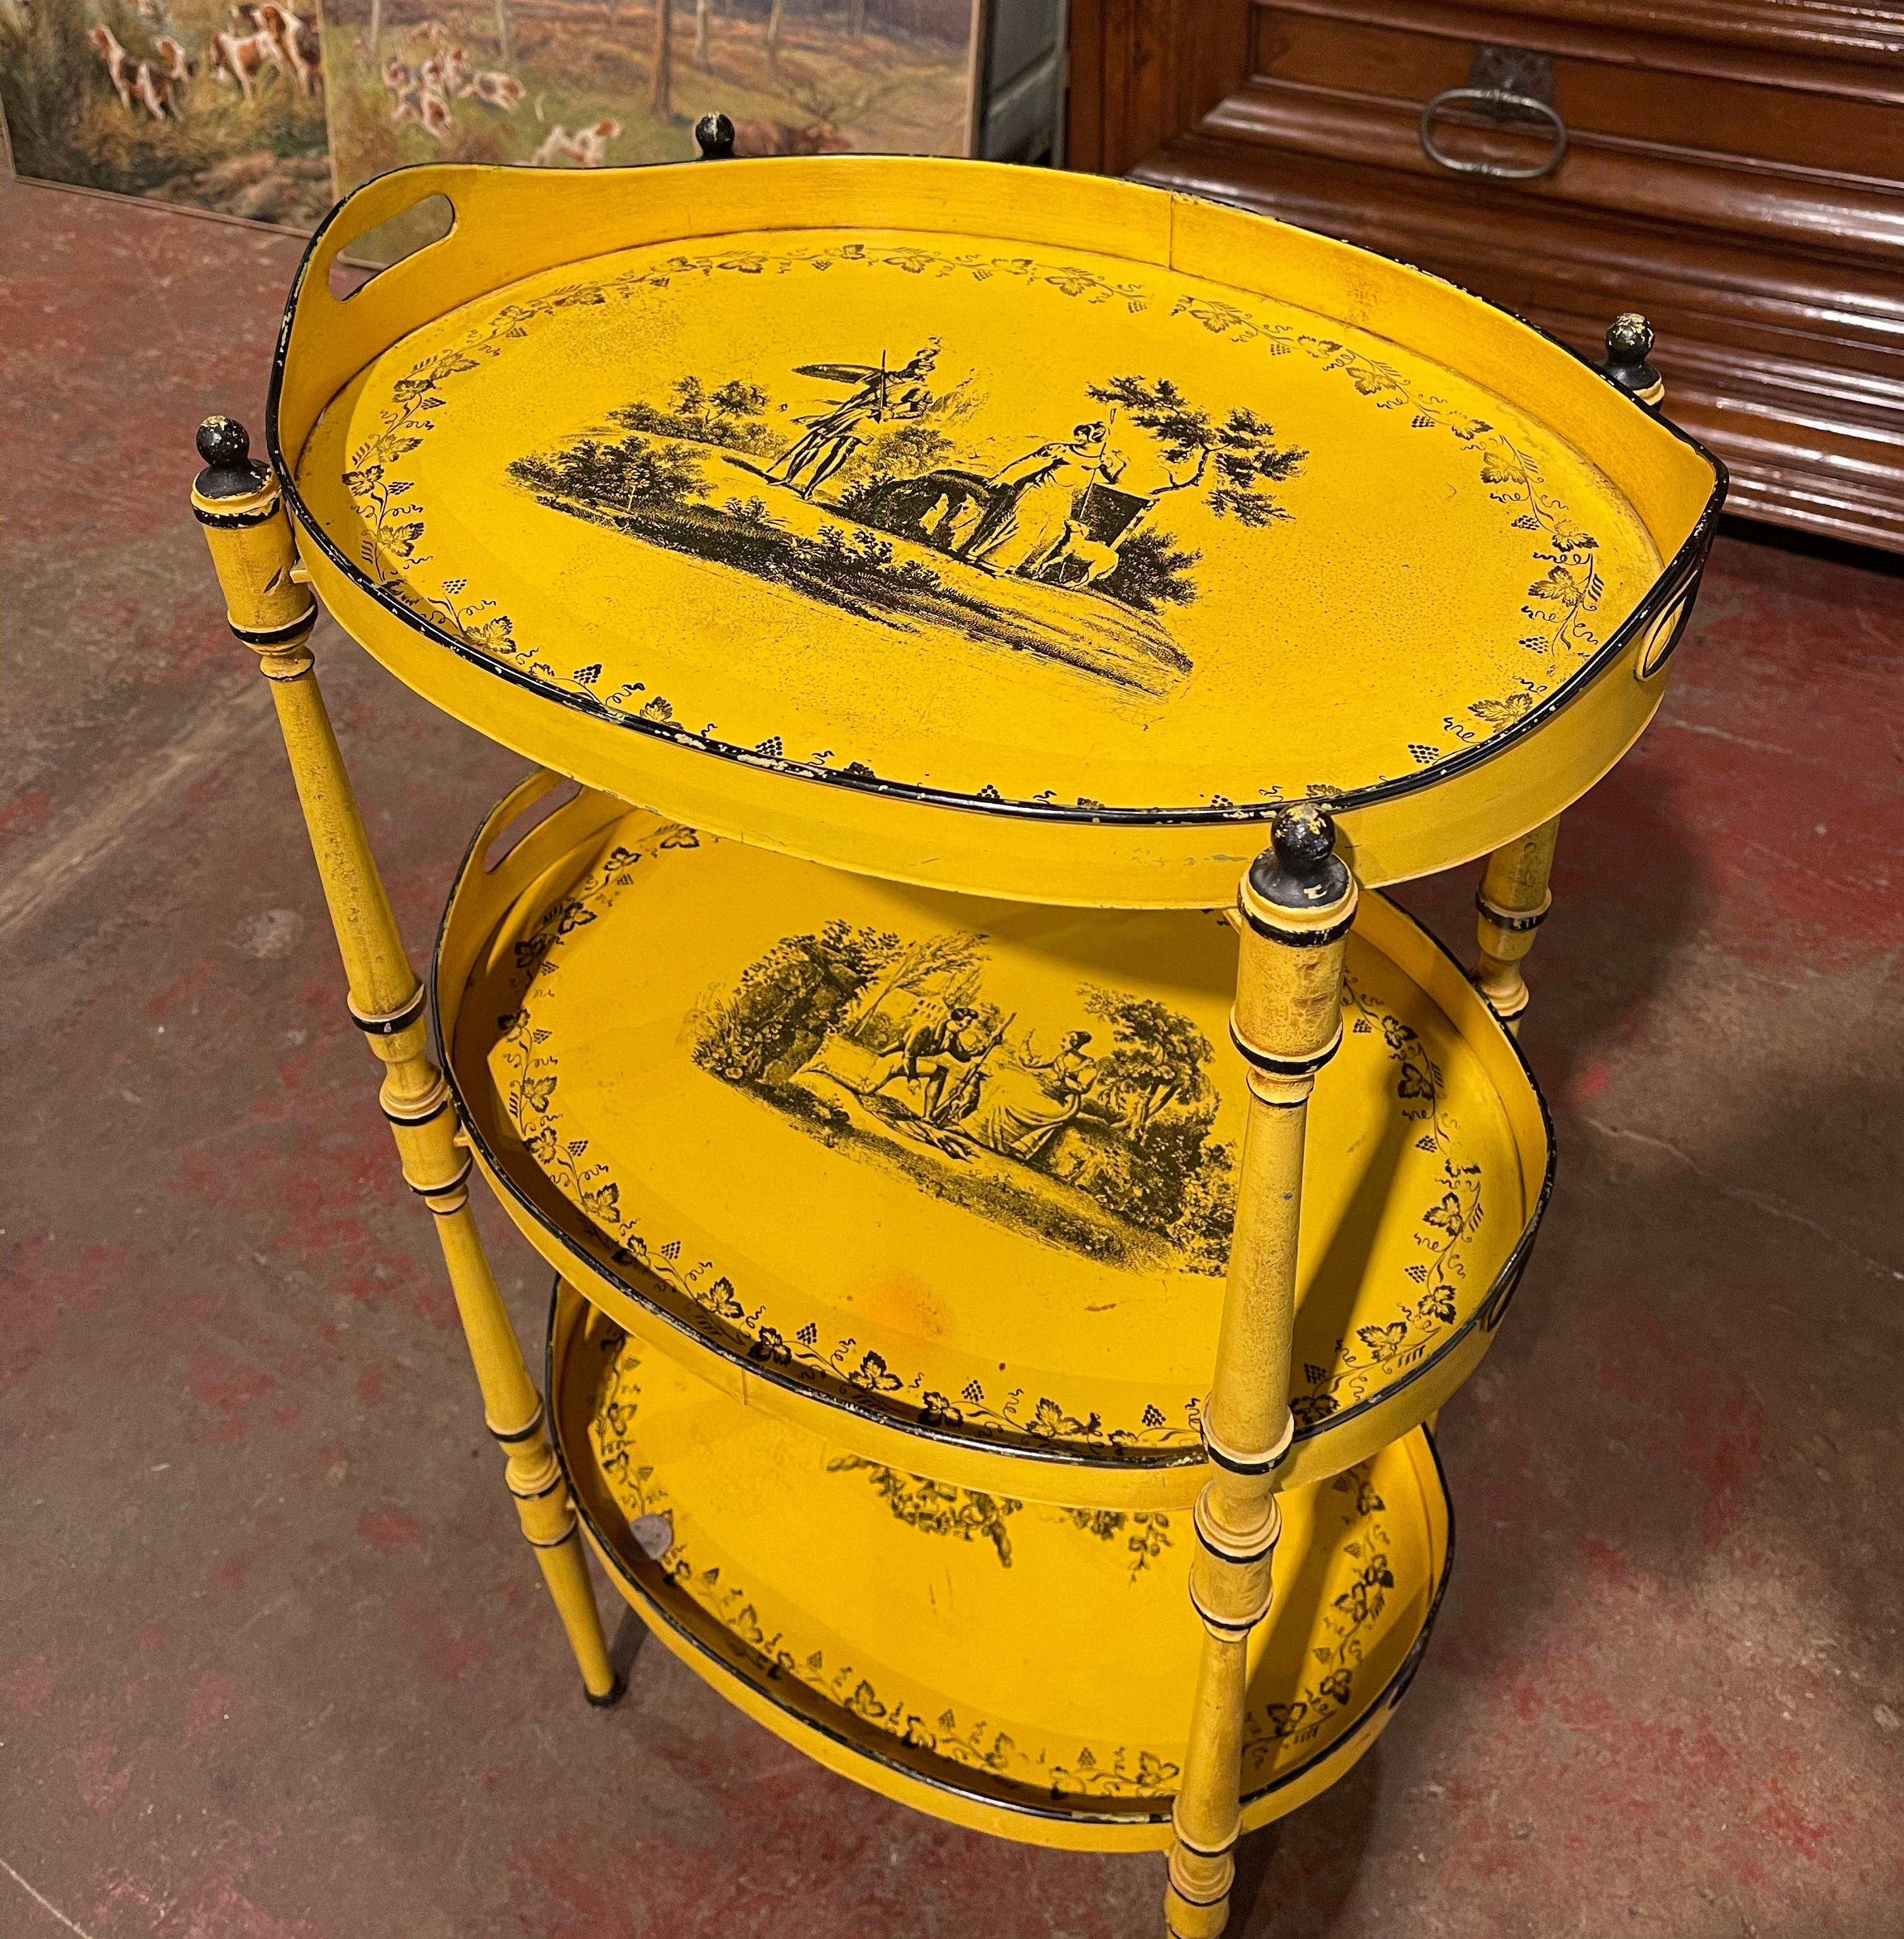 This colorful table was crafted in France circa 1960. Made of metal, the occasional table stands on rounded tapered legs and features three removable trays dressed with side handles; each plateau is hand painted with courting scenes and floral